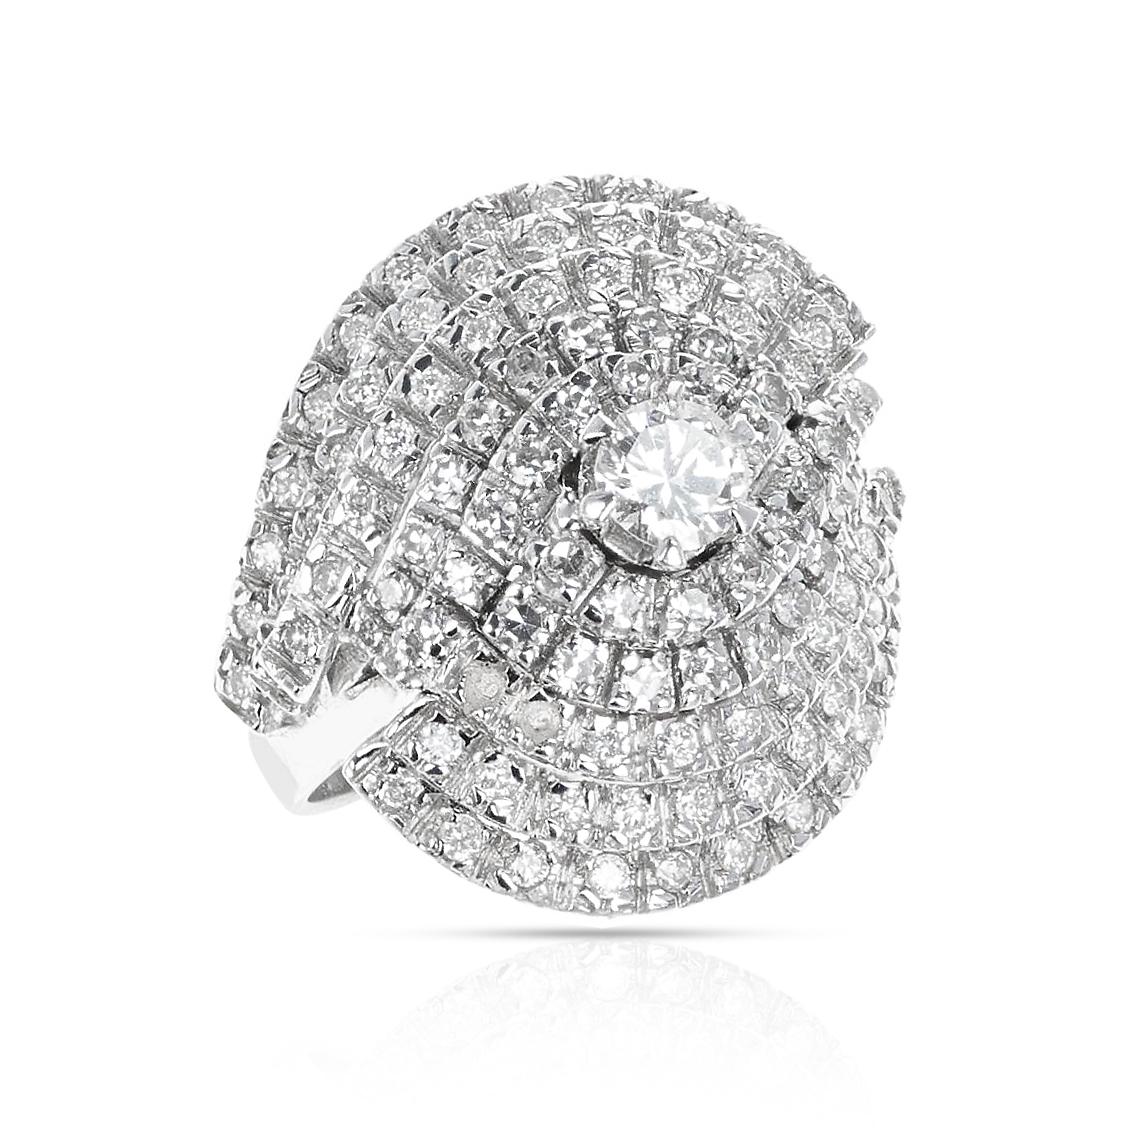 A Center Round Diamond with Diamond Layered Cocktail Ring made in 18 Karat White Gold. The ring size is US 6.25. 